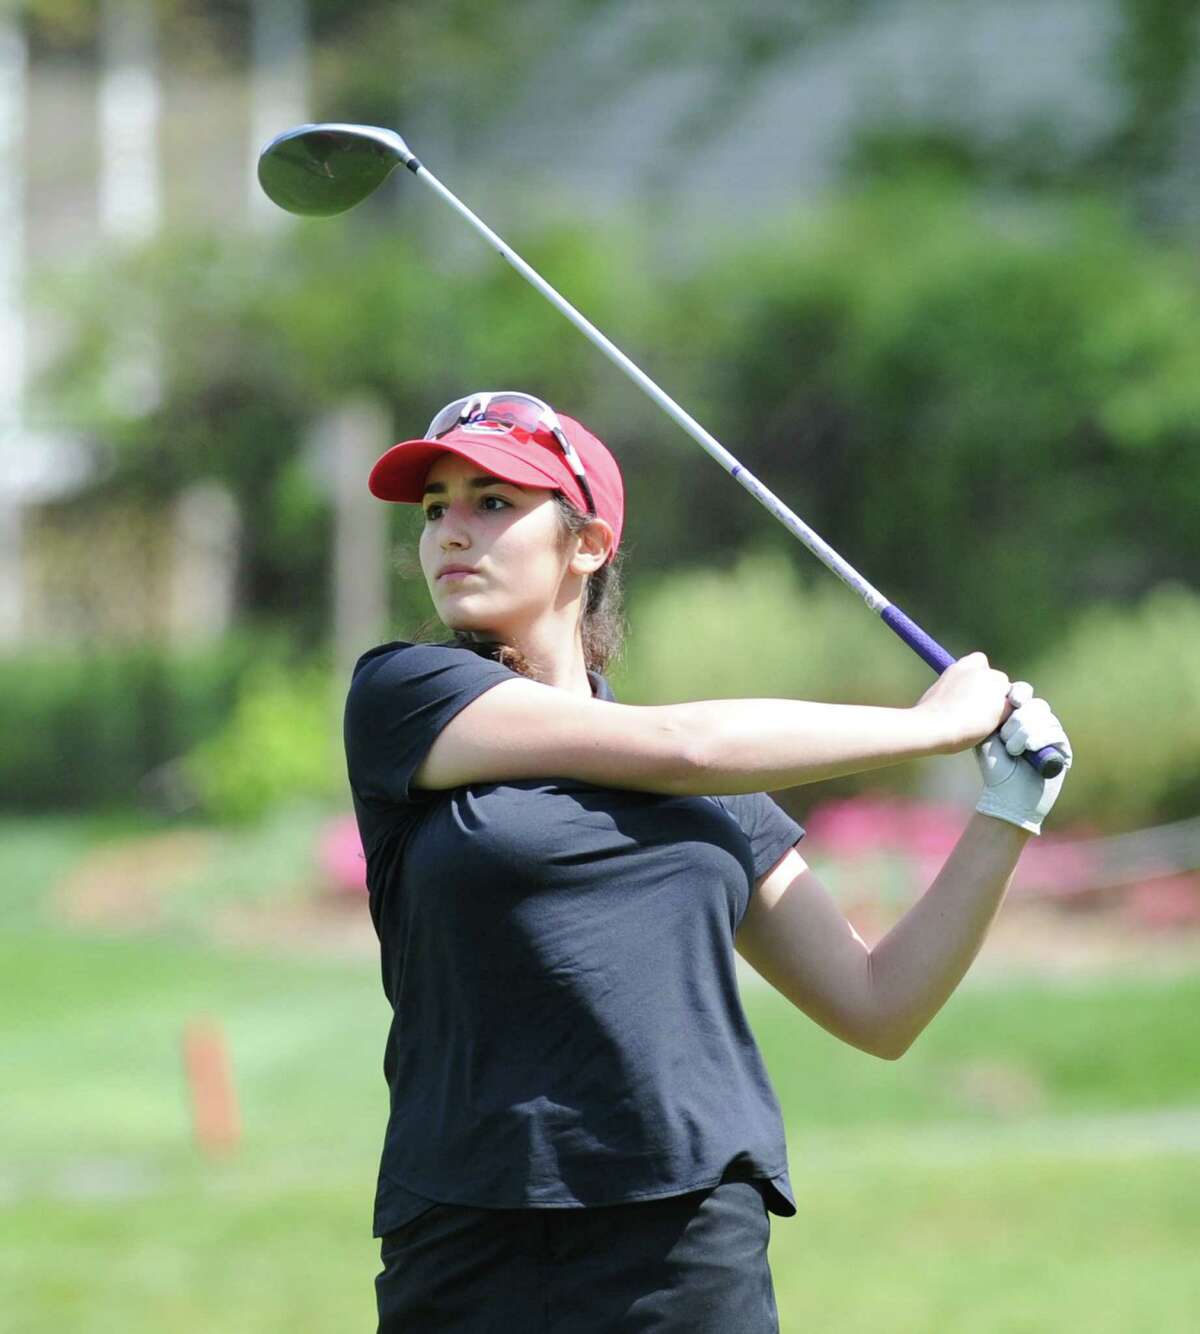 Tessa Piontkowski of New Canaan drives off the first tee during the girls high school golf match between Greenwich High School and New Canaan High School at the Milbrook Club in Greenwich, Conn., Thursday, May 12, 2016.